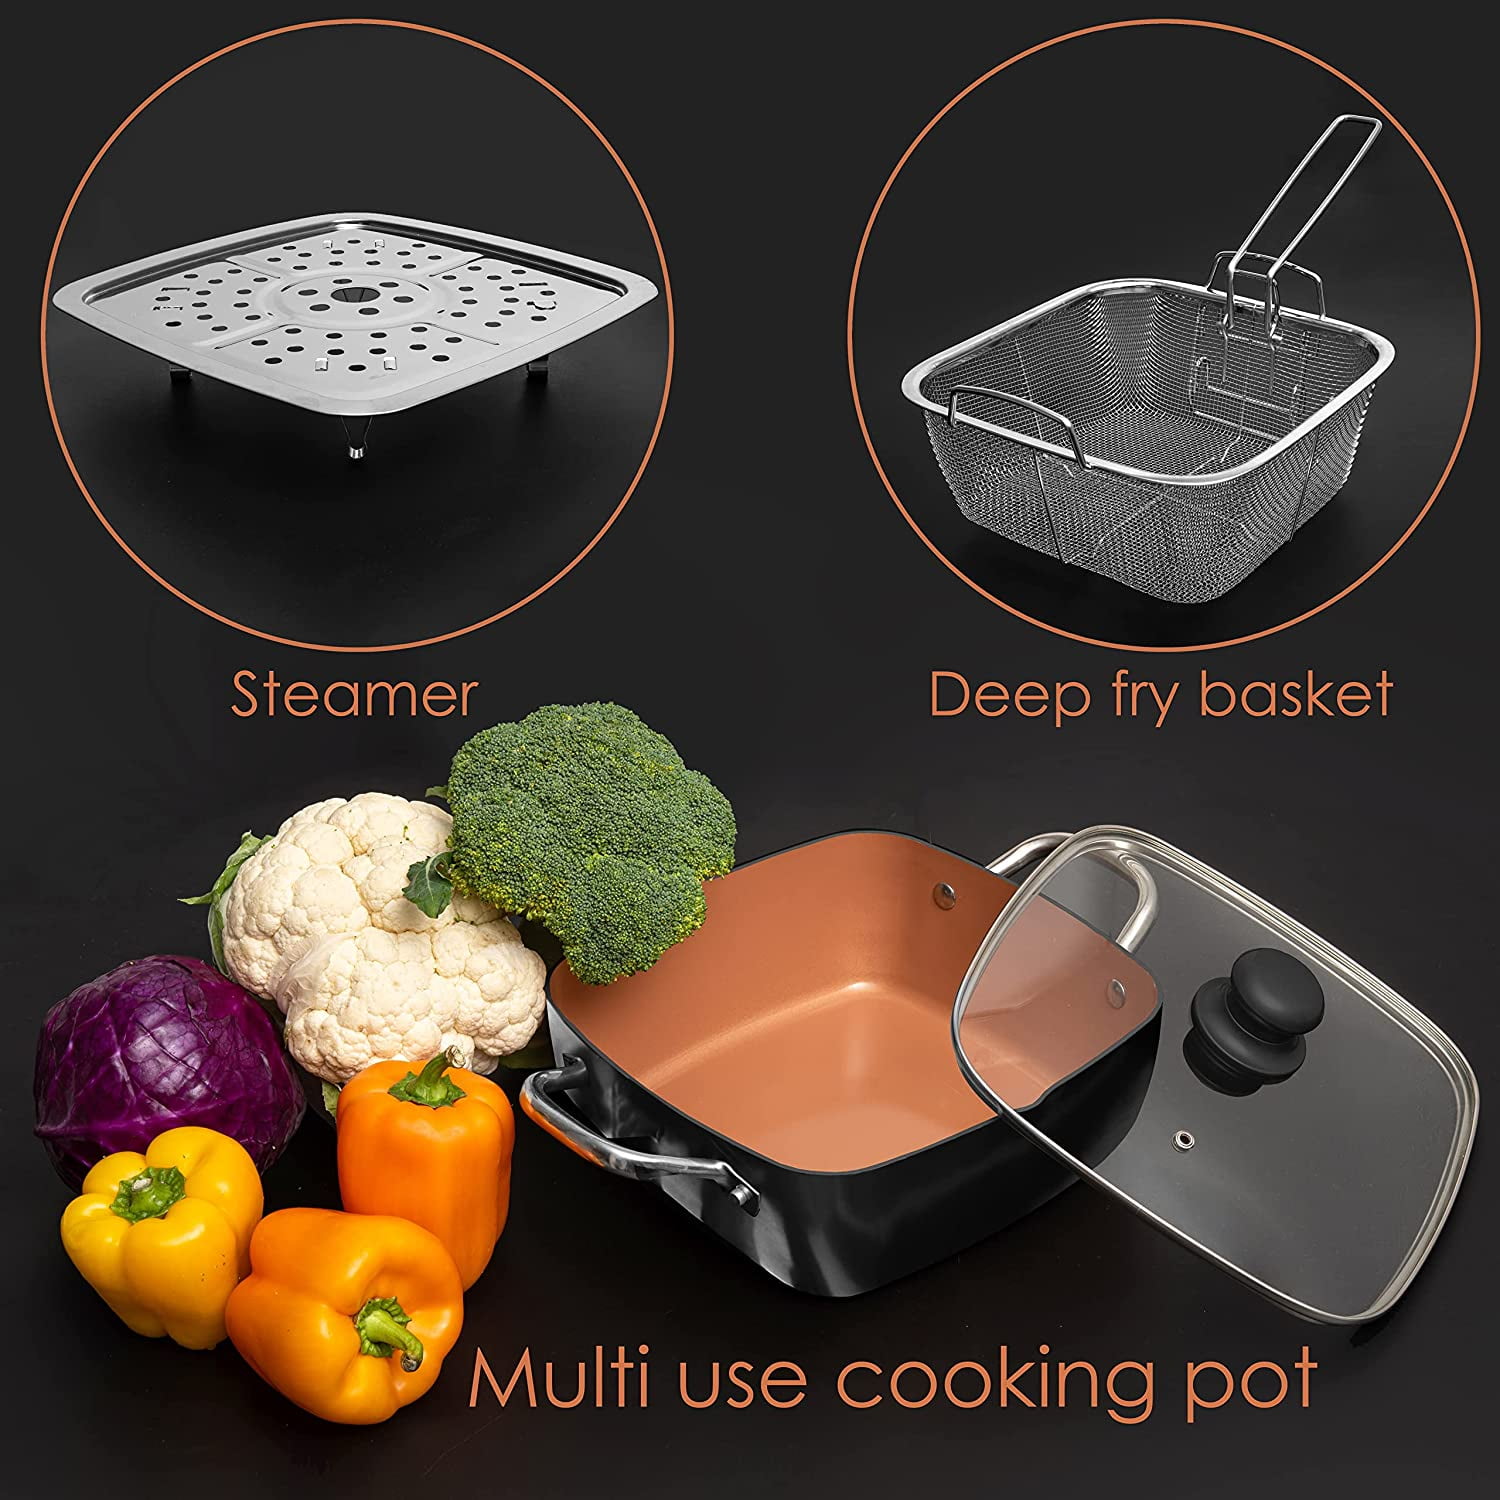 MORYEN Pans Non-Stick Copper Square Frying Pan Skillet with Ceramic Coating  Oven Dishwasher Safe Cooking pots and Pans Wok